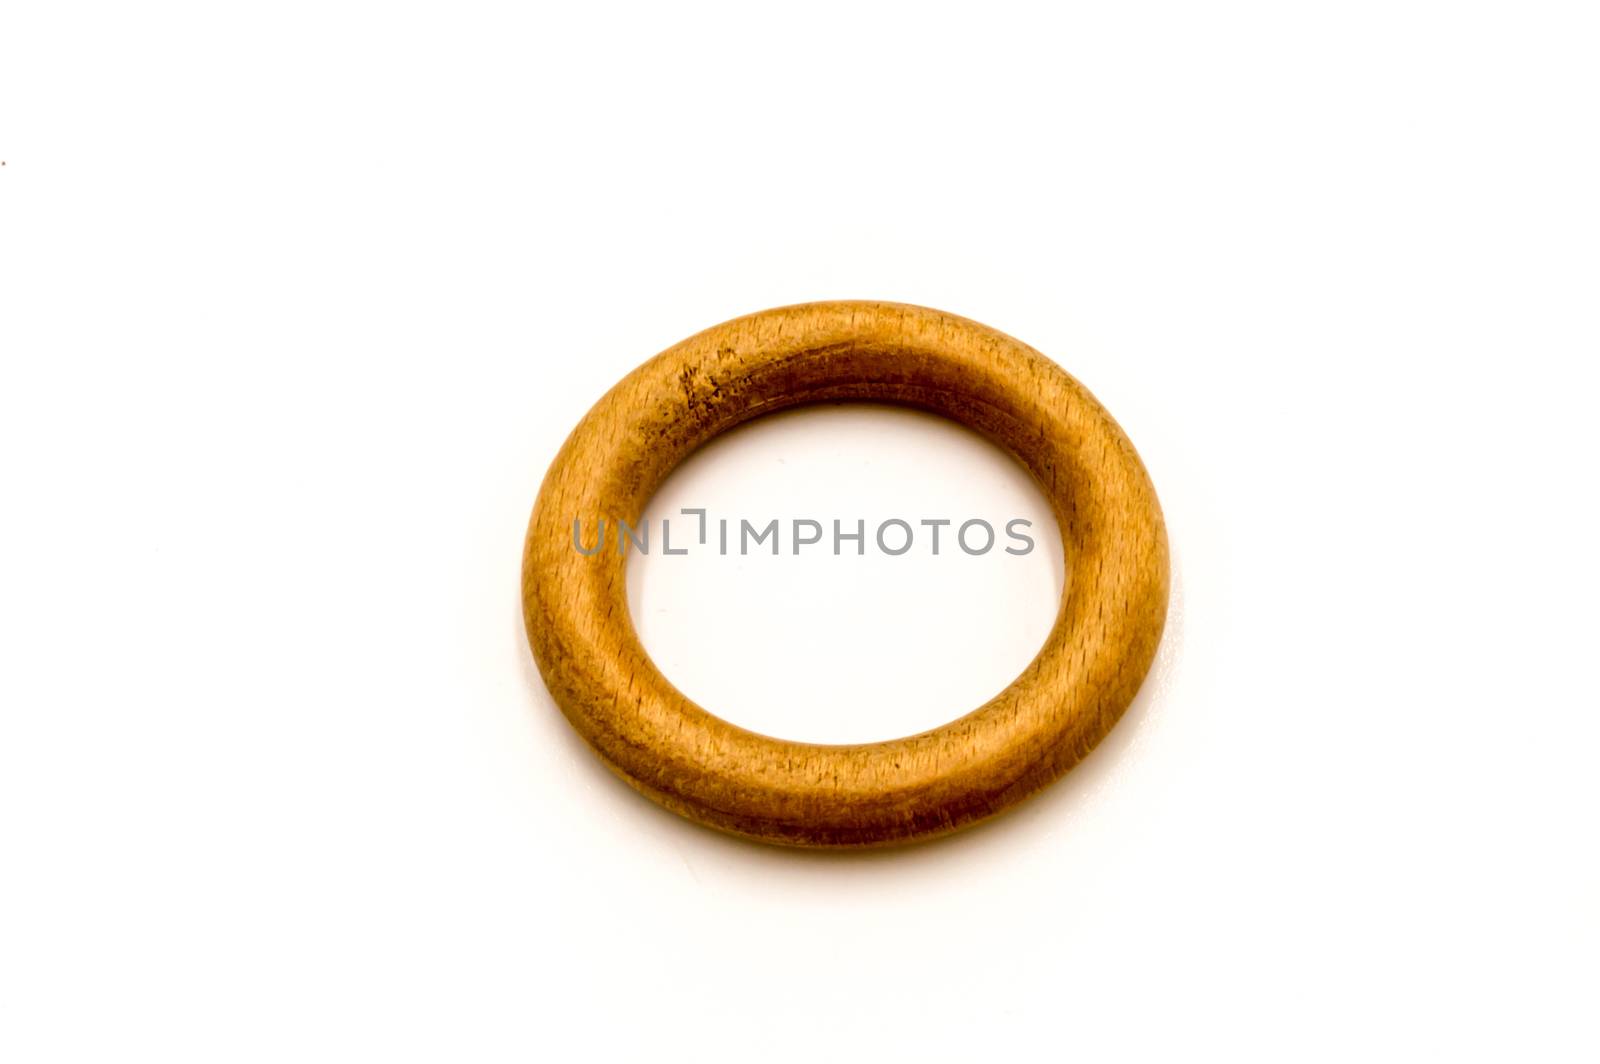 light colored wooden ring  by Philou1000